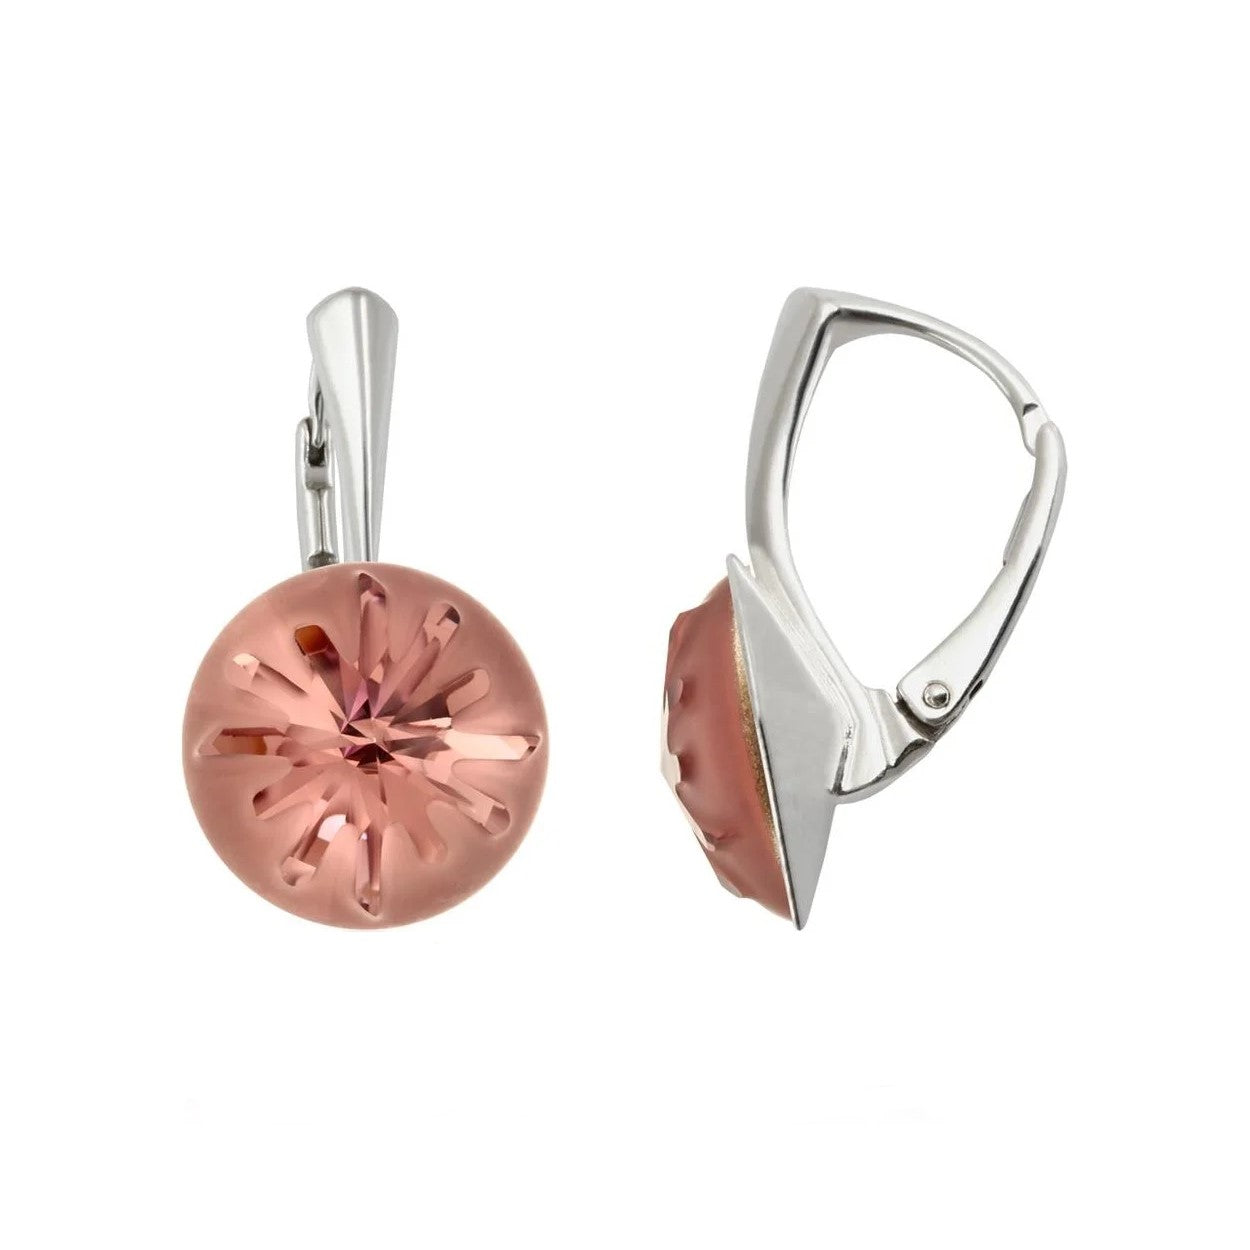 Seaside Rose Elegance Drop Earrings in Silver - Front View with Blush Rose Crystal